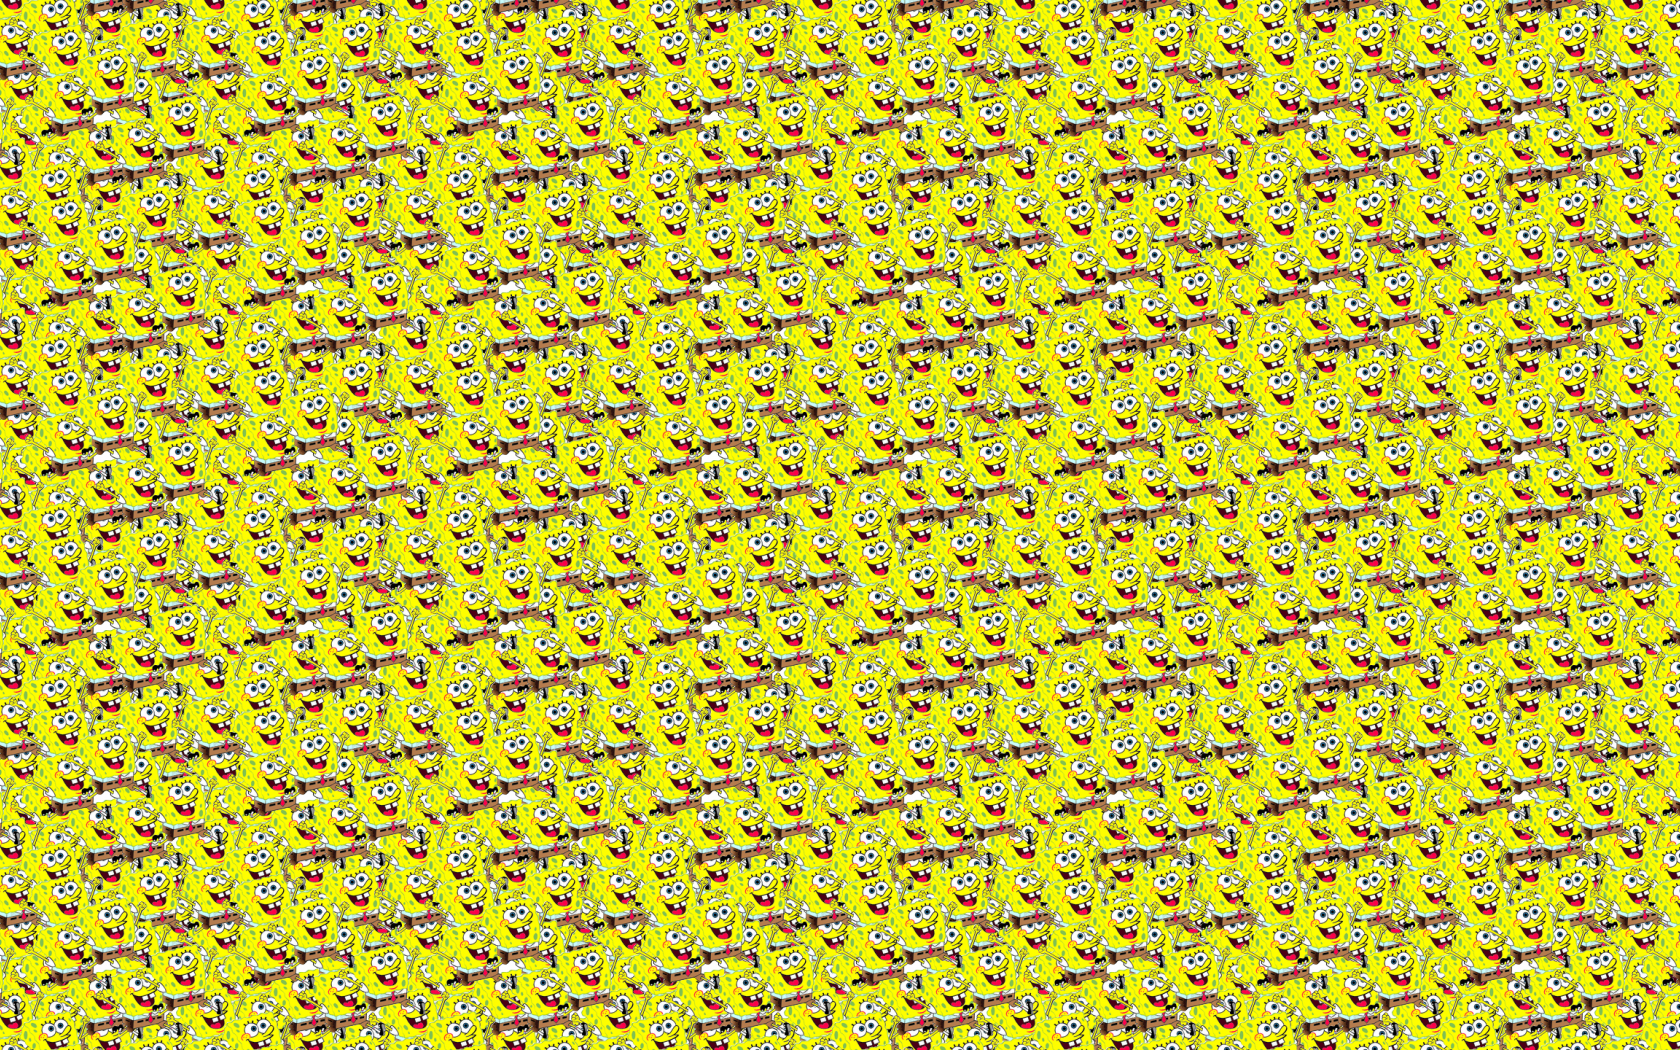 Free download Desktop Wallpaper is easy Just save the wallpaper and set it as your [2560x1440] for your Desktop, Mobile & Tablet. Explore SpongeBob Wallpaper for Computer